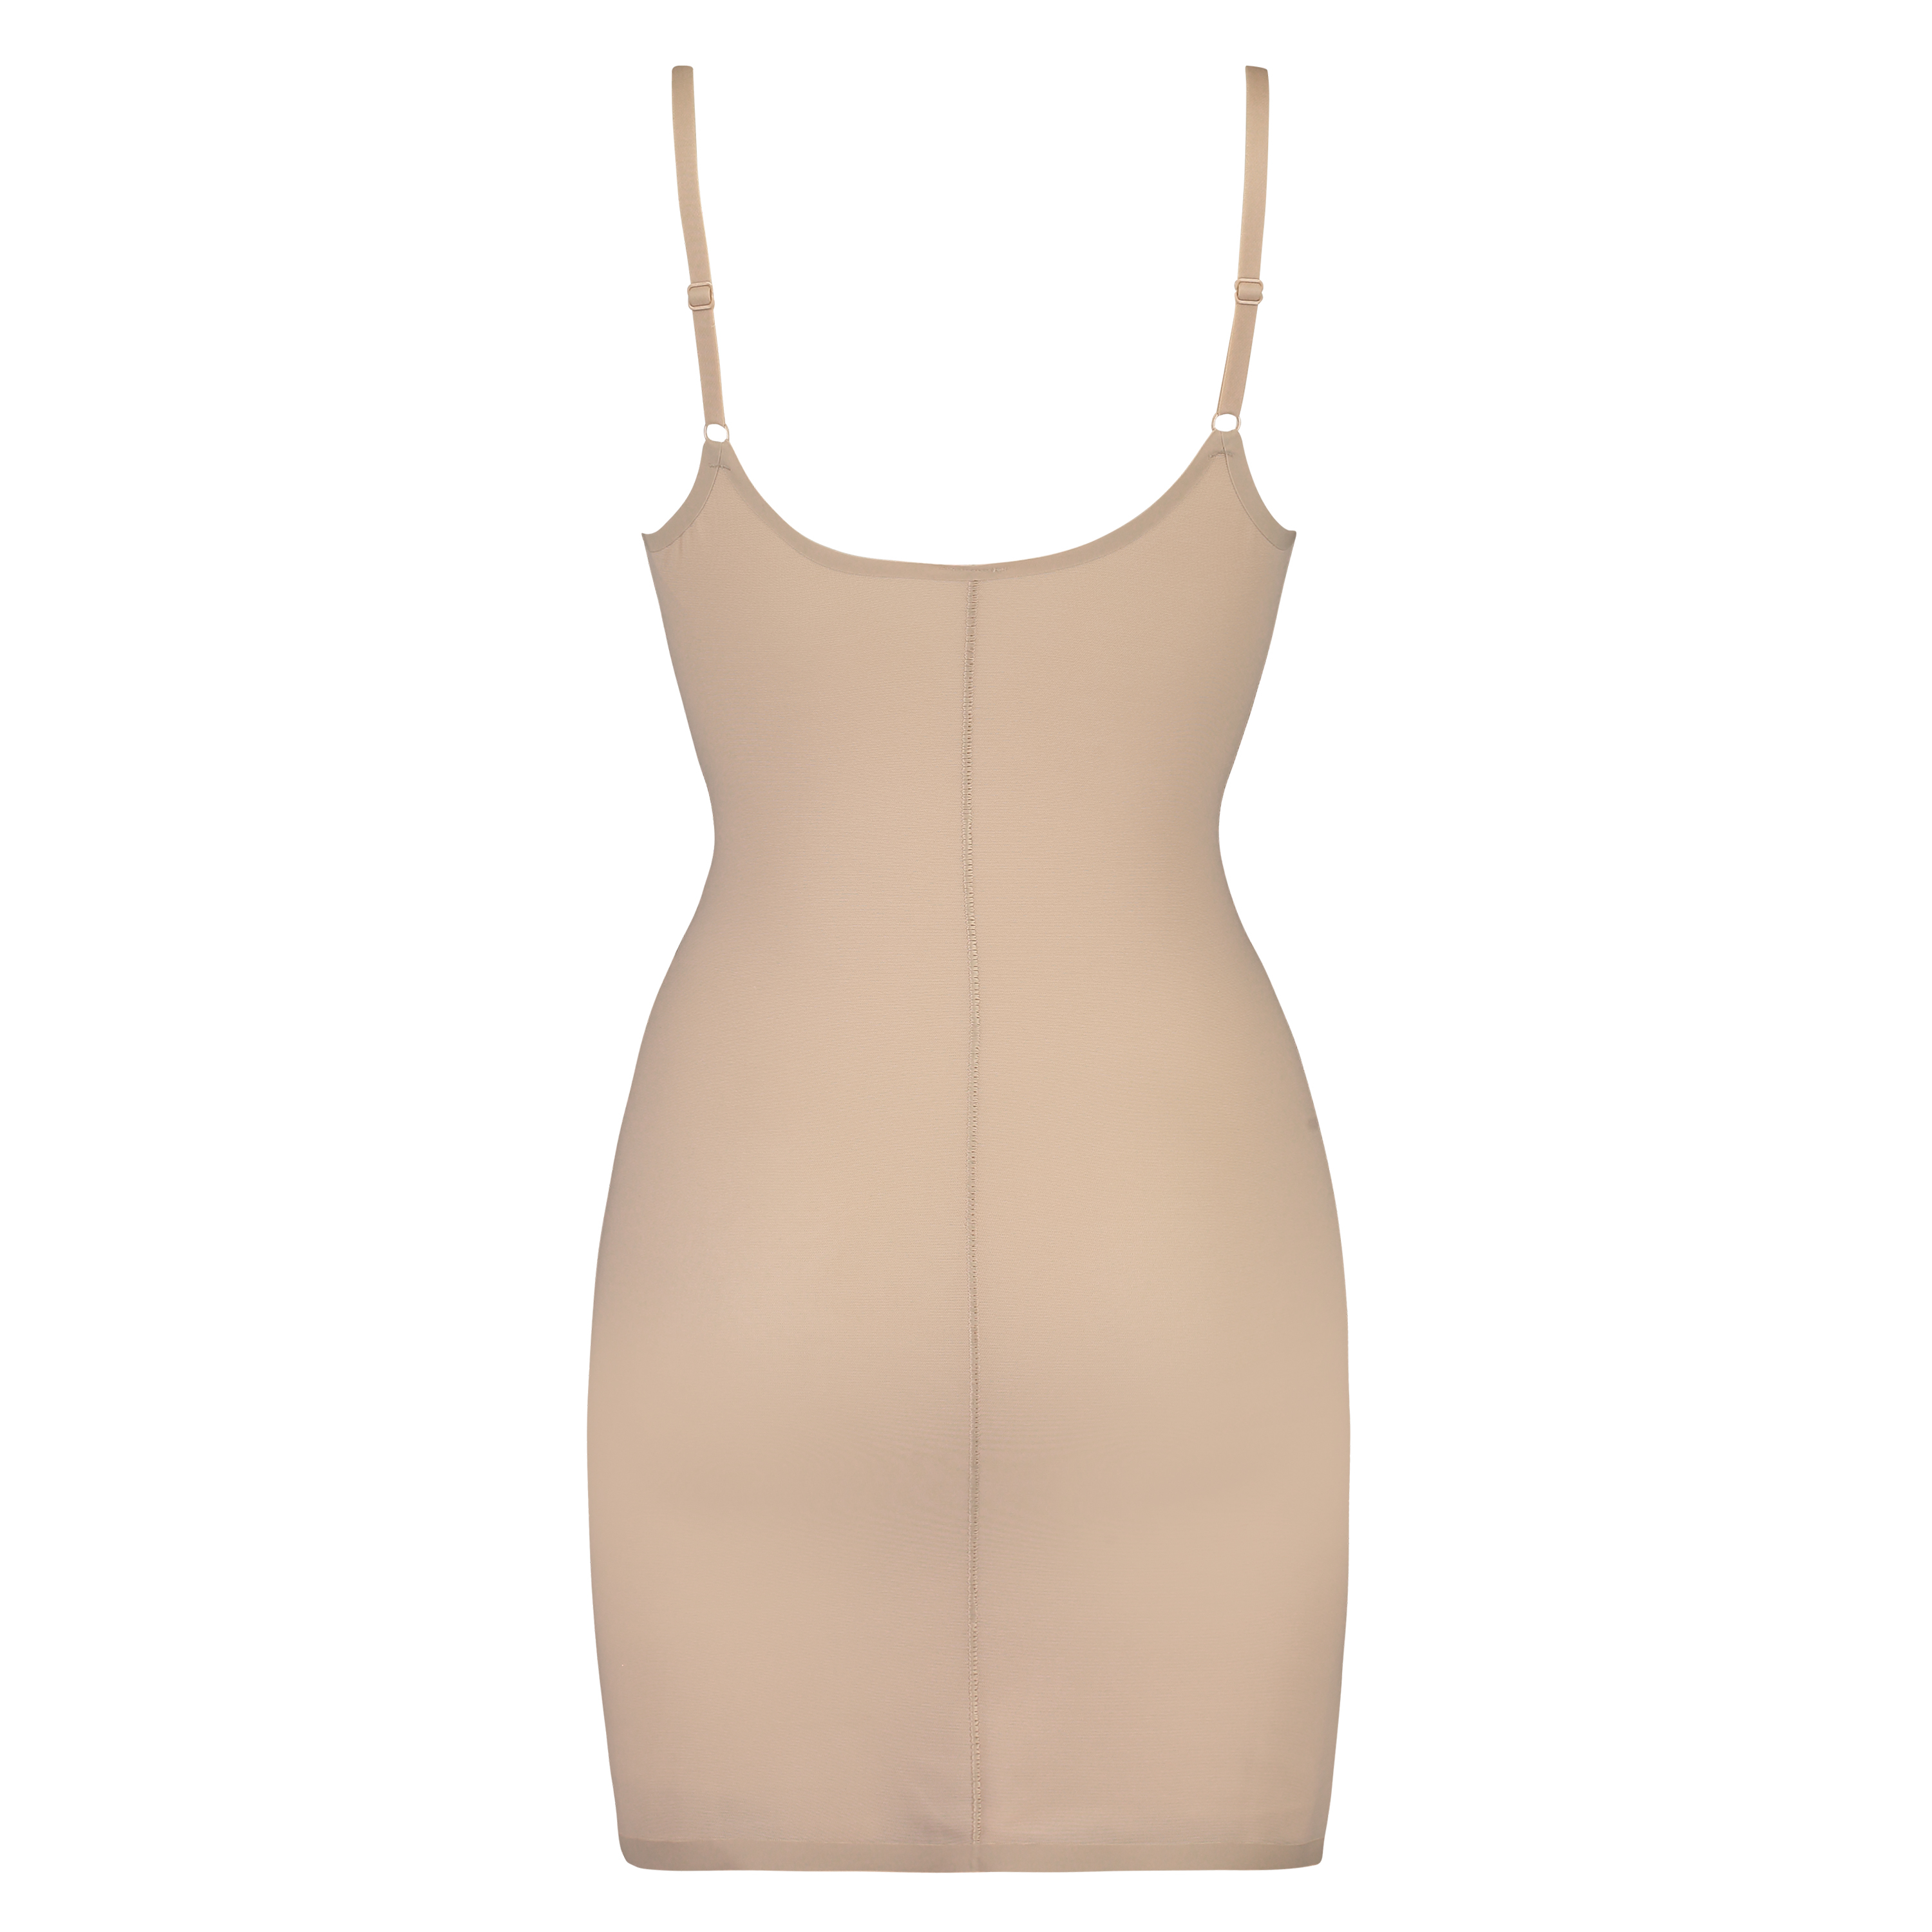 Sculpting scallop dress - Level 3, Beżowy, main